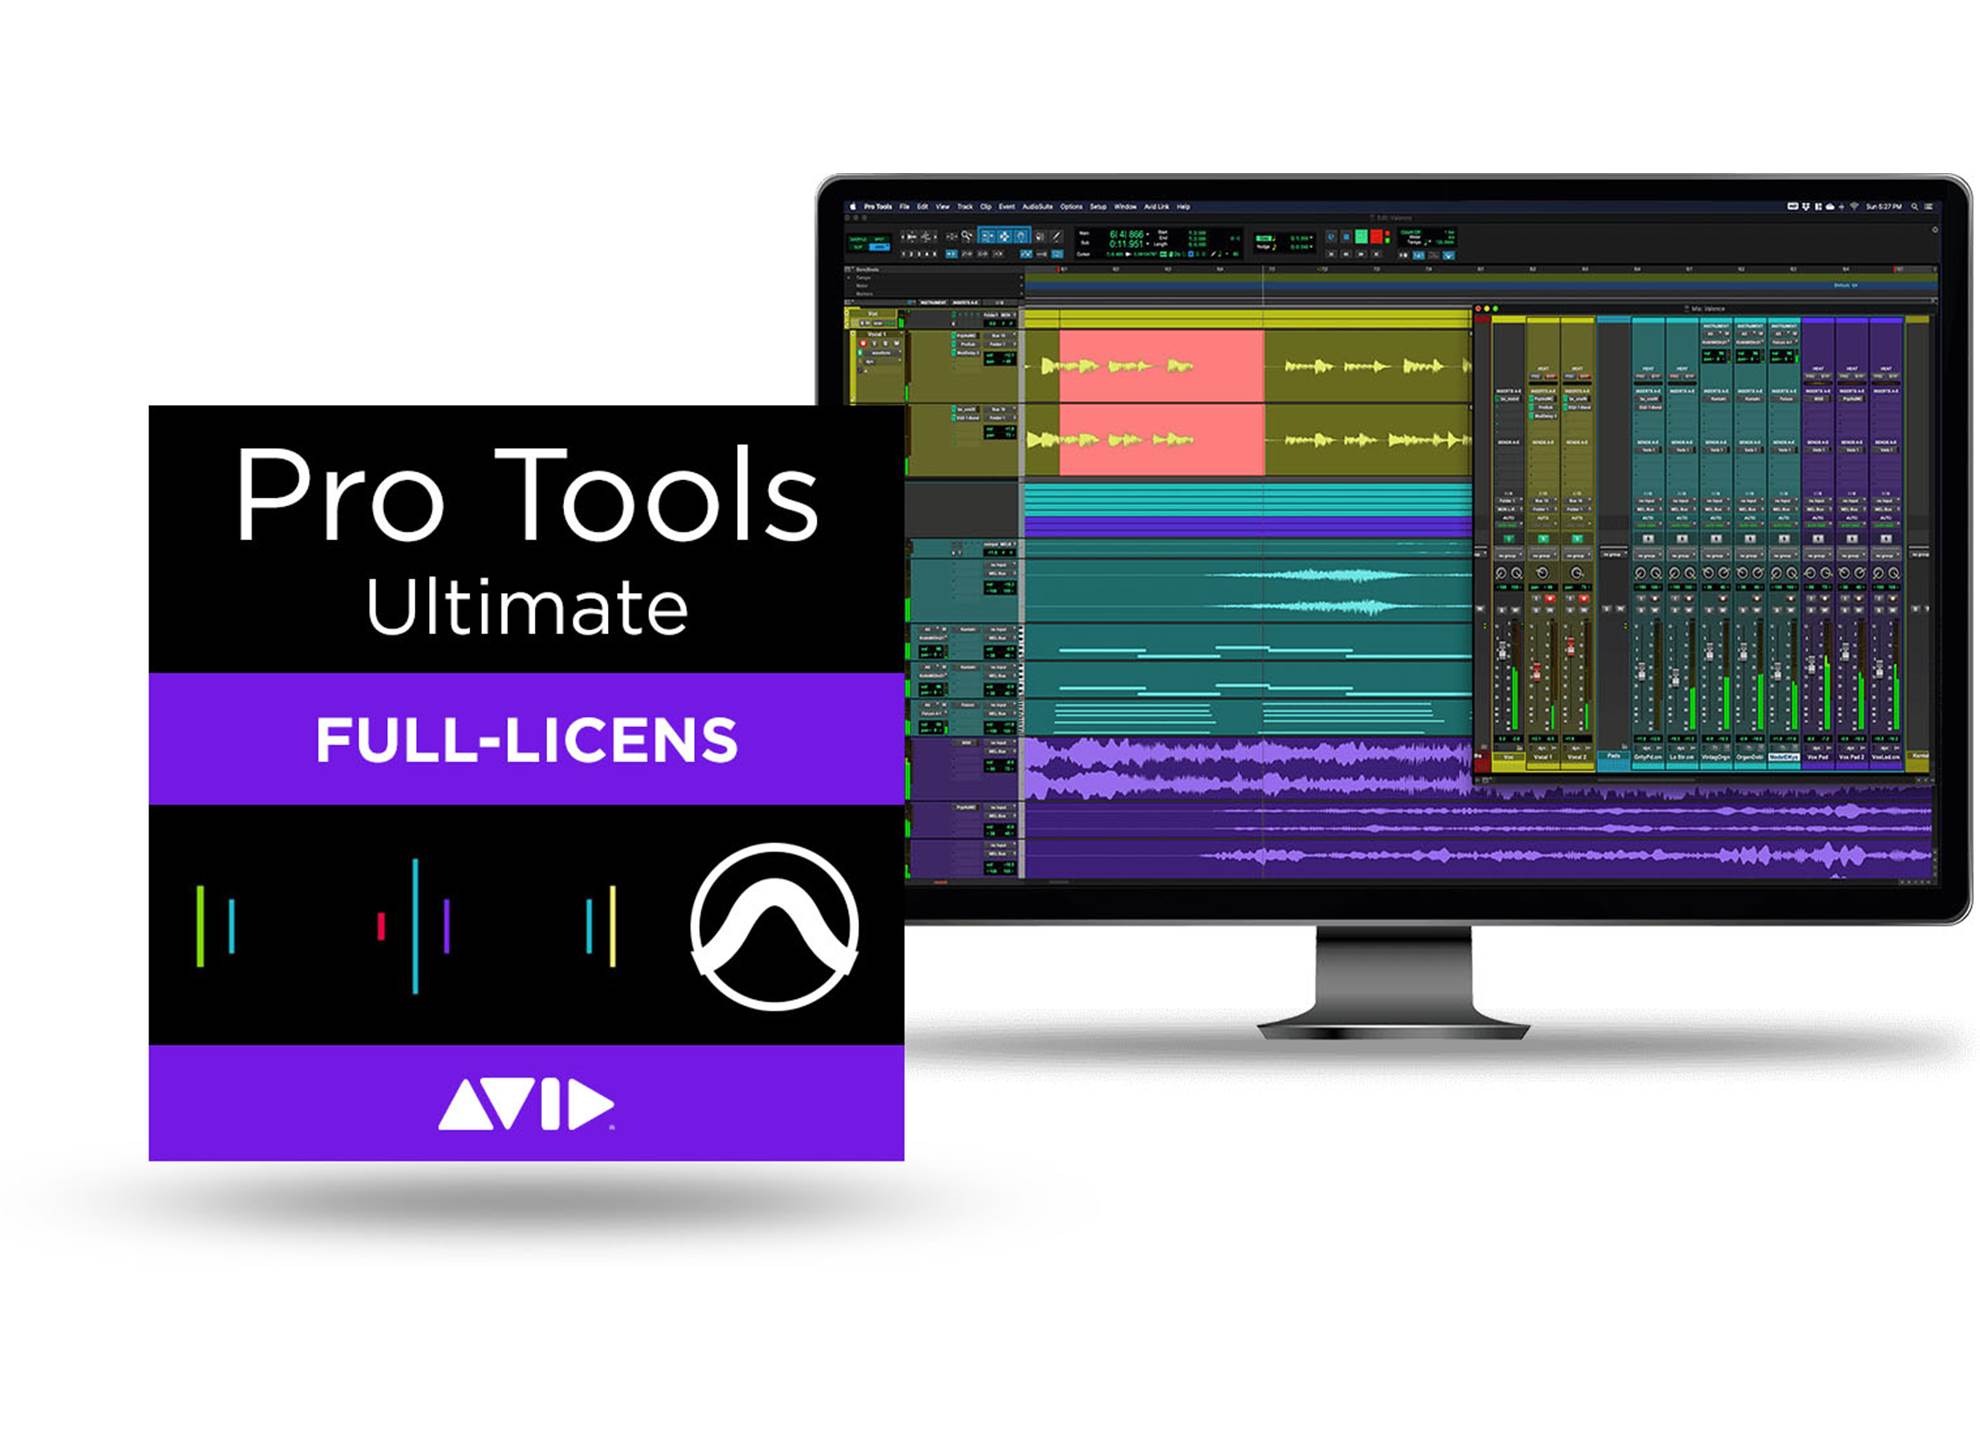 Pro Tools Ultimate Full-licens